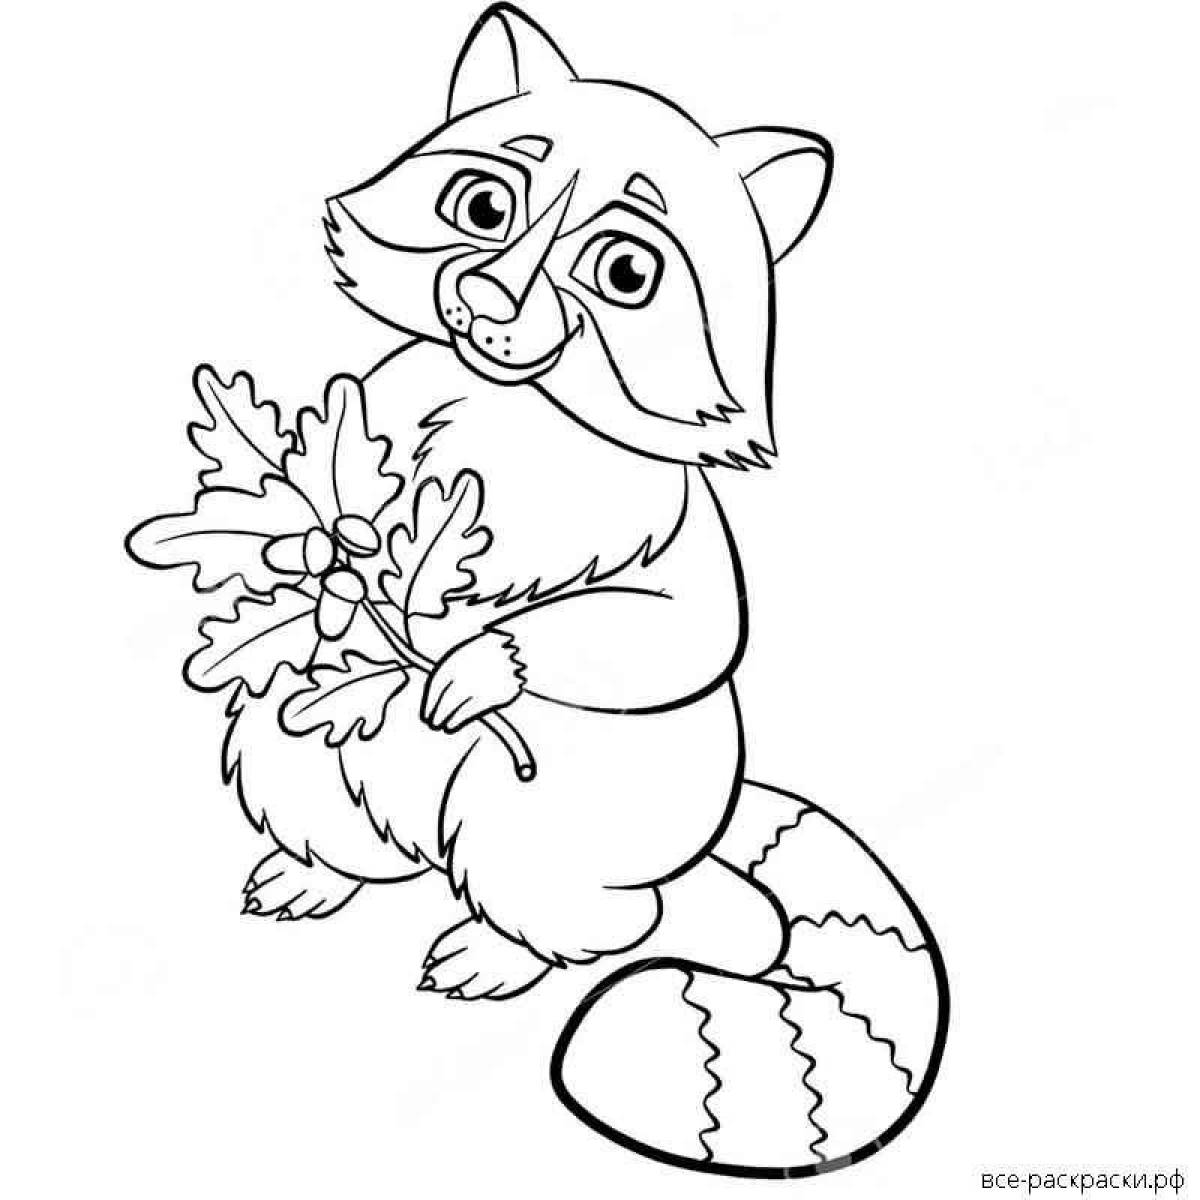 Coloring pages with colorful raccoon for kids